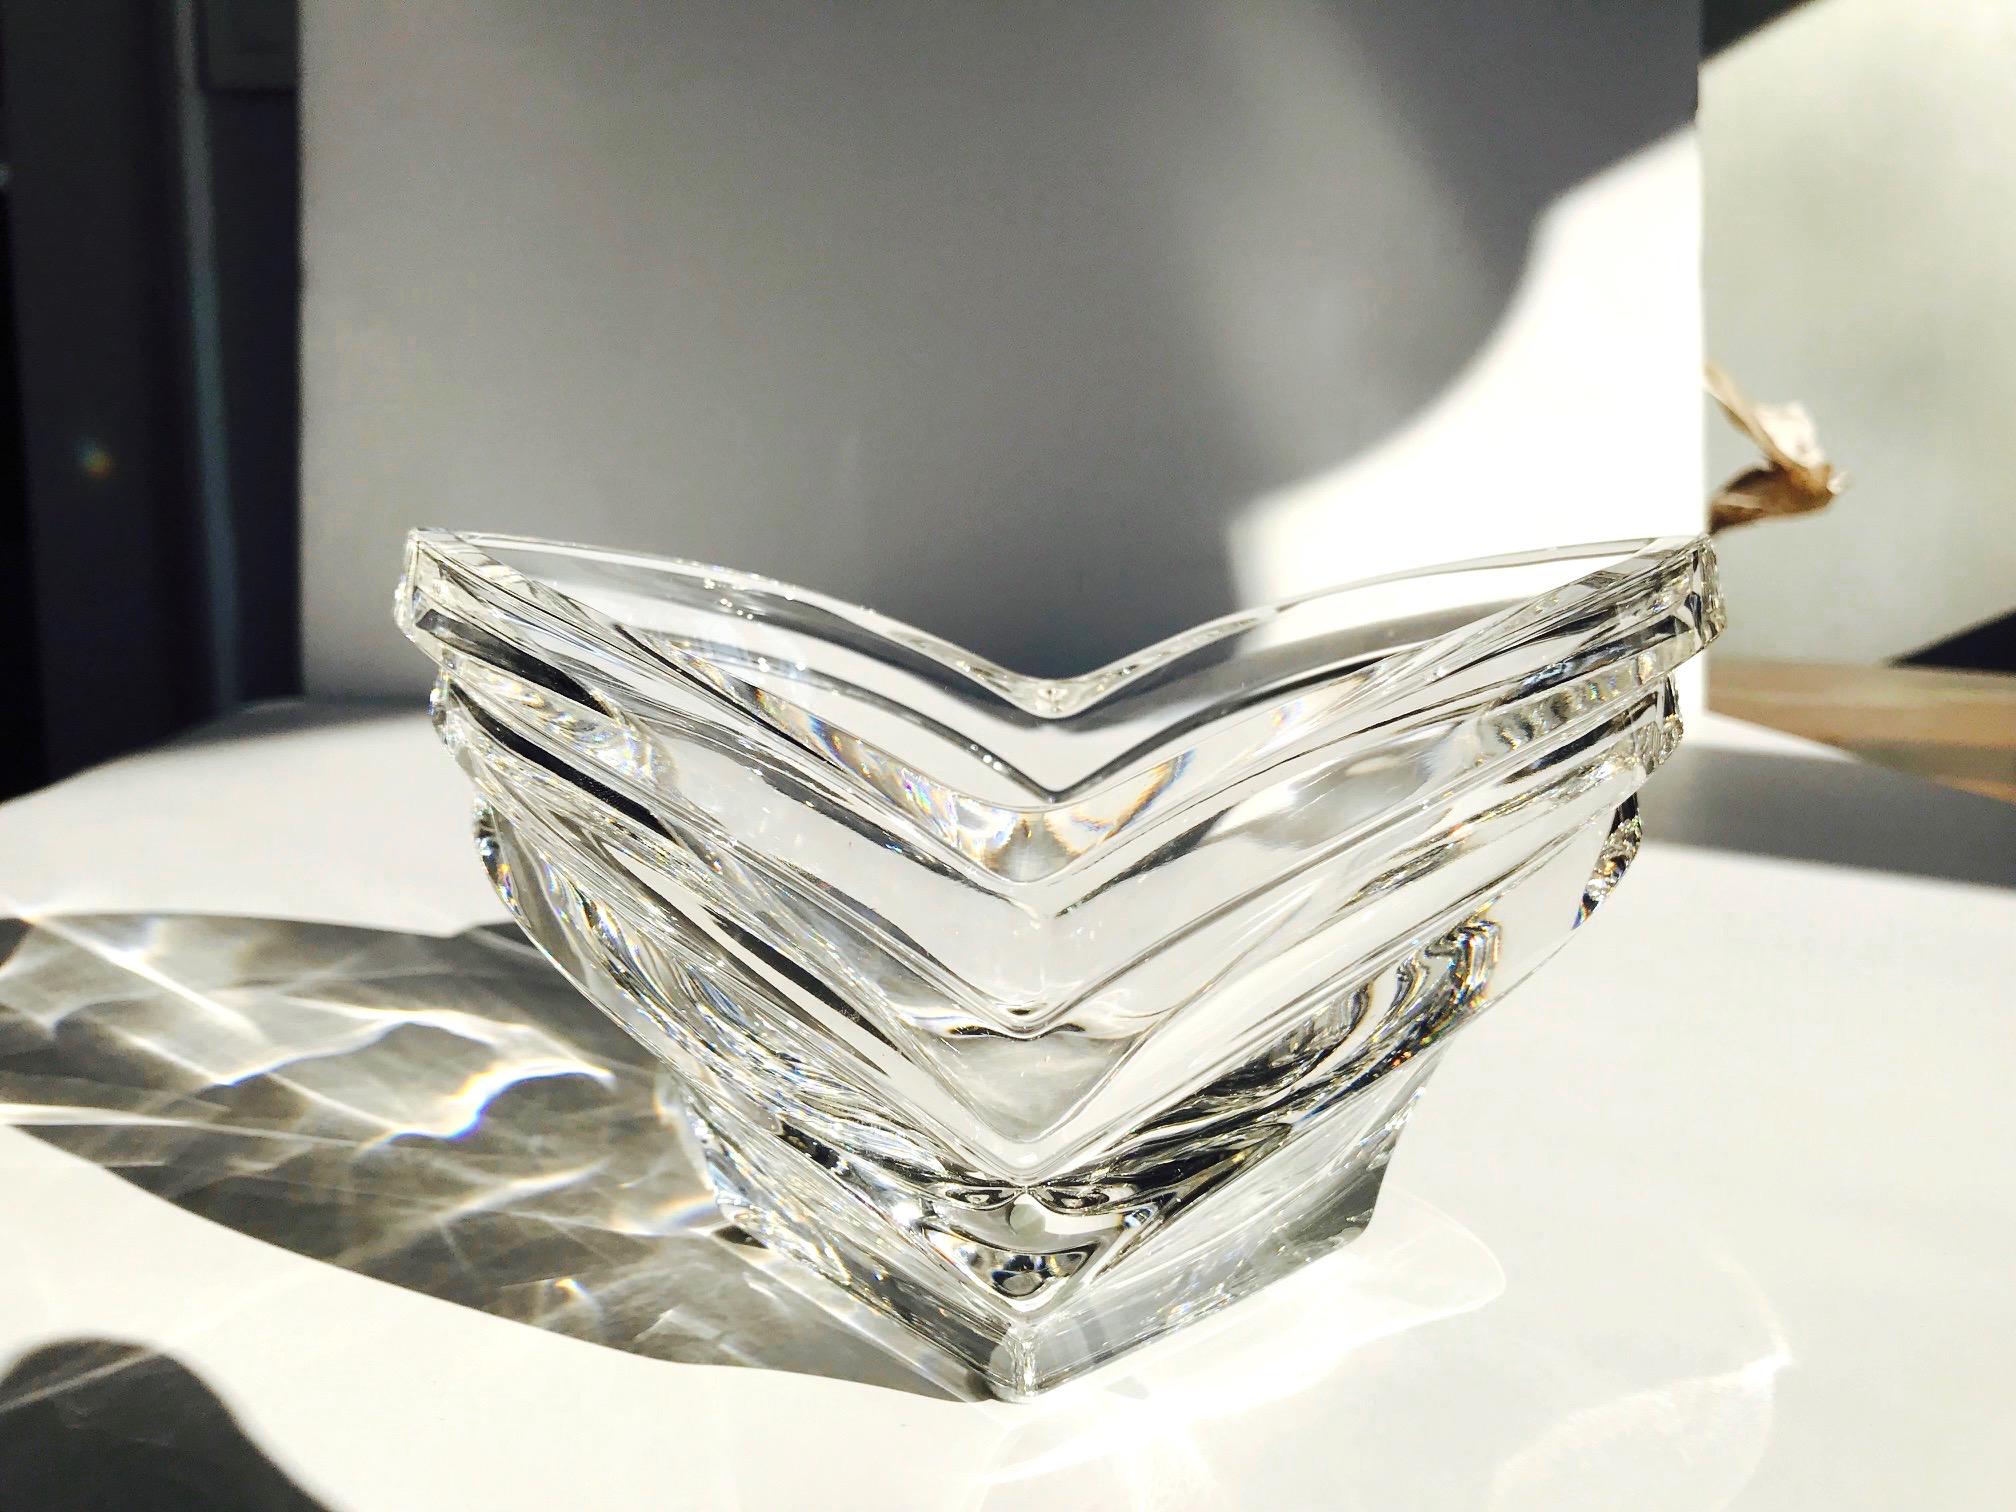 Mid-Century Modern crystal dish with geometric fluted glass. The hand blown dish features horizontal fluting in perfect symmetry resembling a wave formation or perhaps a budding flower. Reflects light like a prism, and is beautiful from every angle.